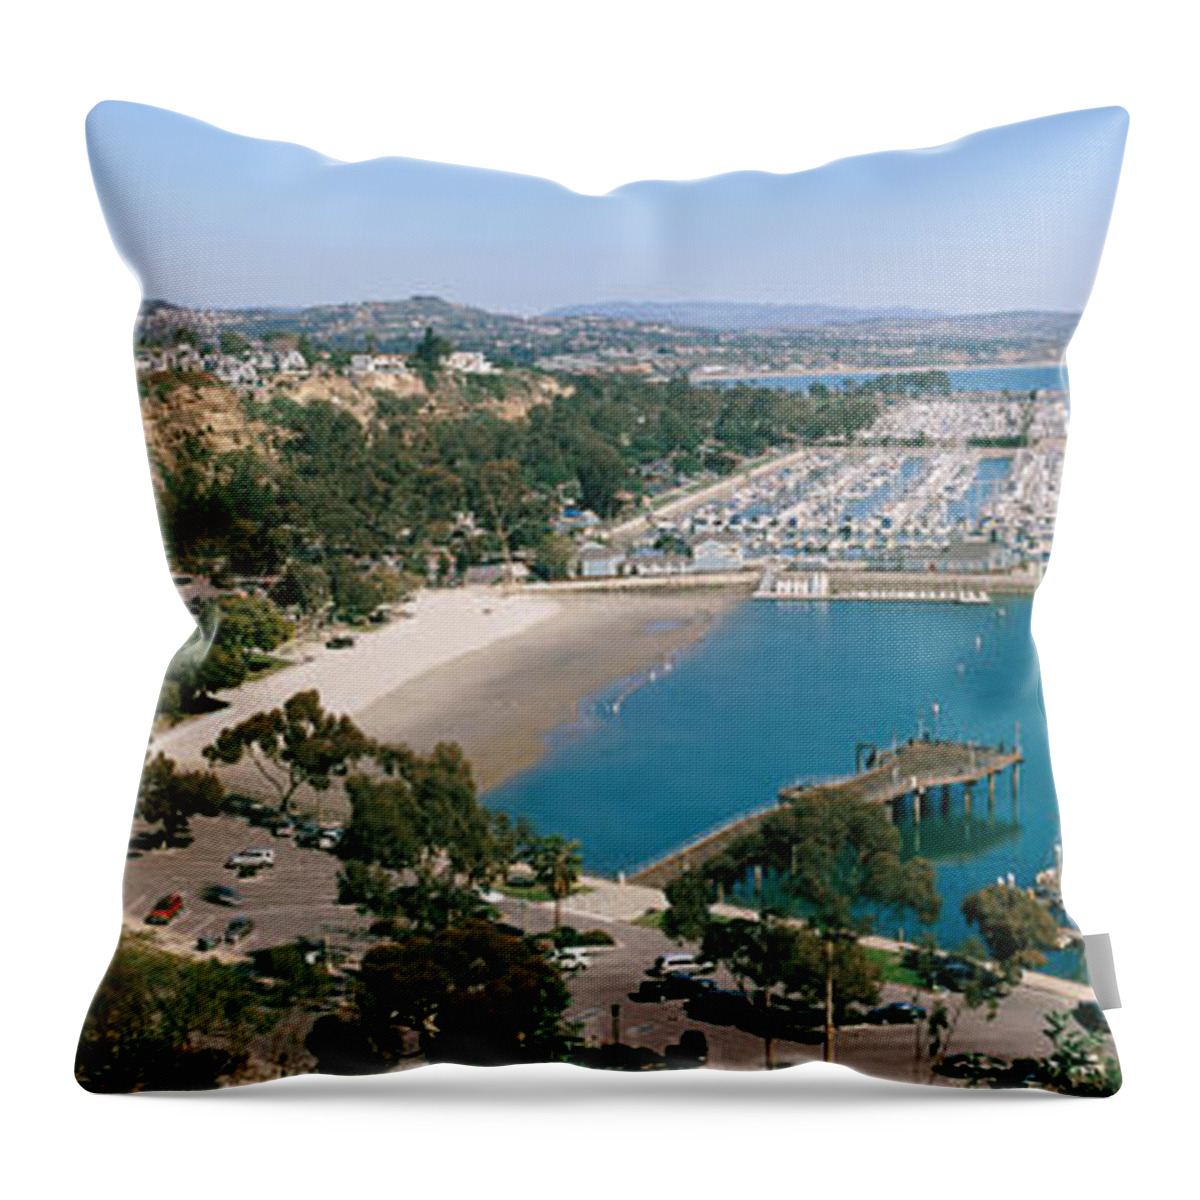 Photography Throw Pillow featuring the photograph High Angle View Of A Harbor, Dana Point by Panoramic Images